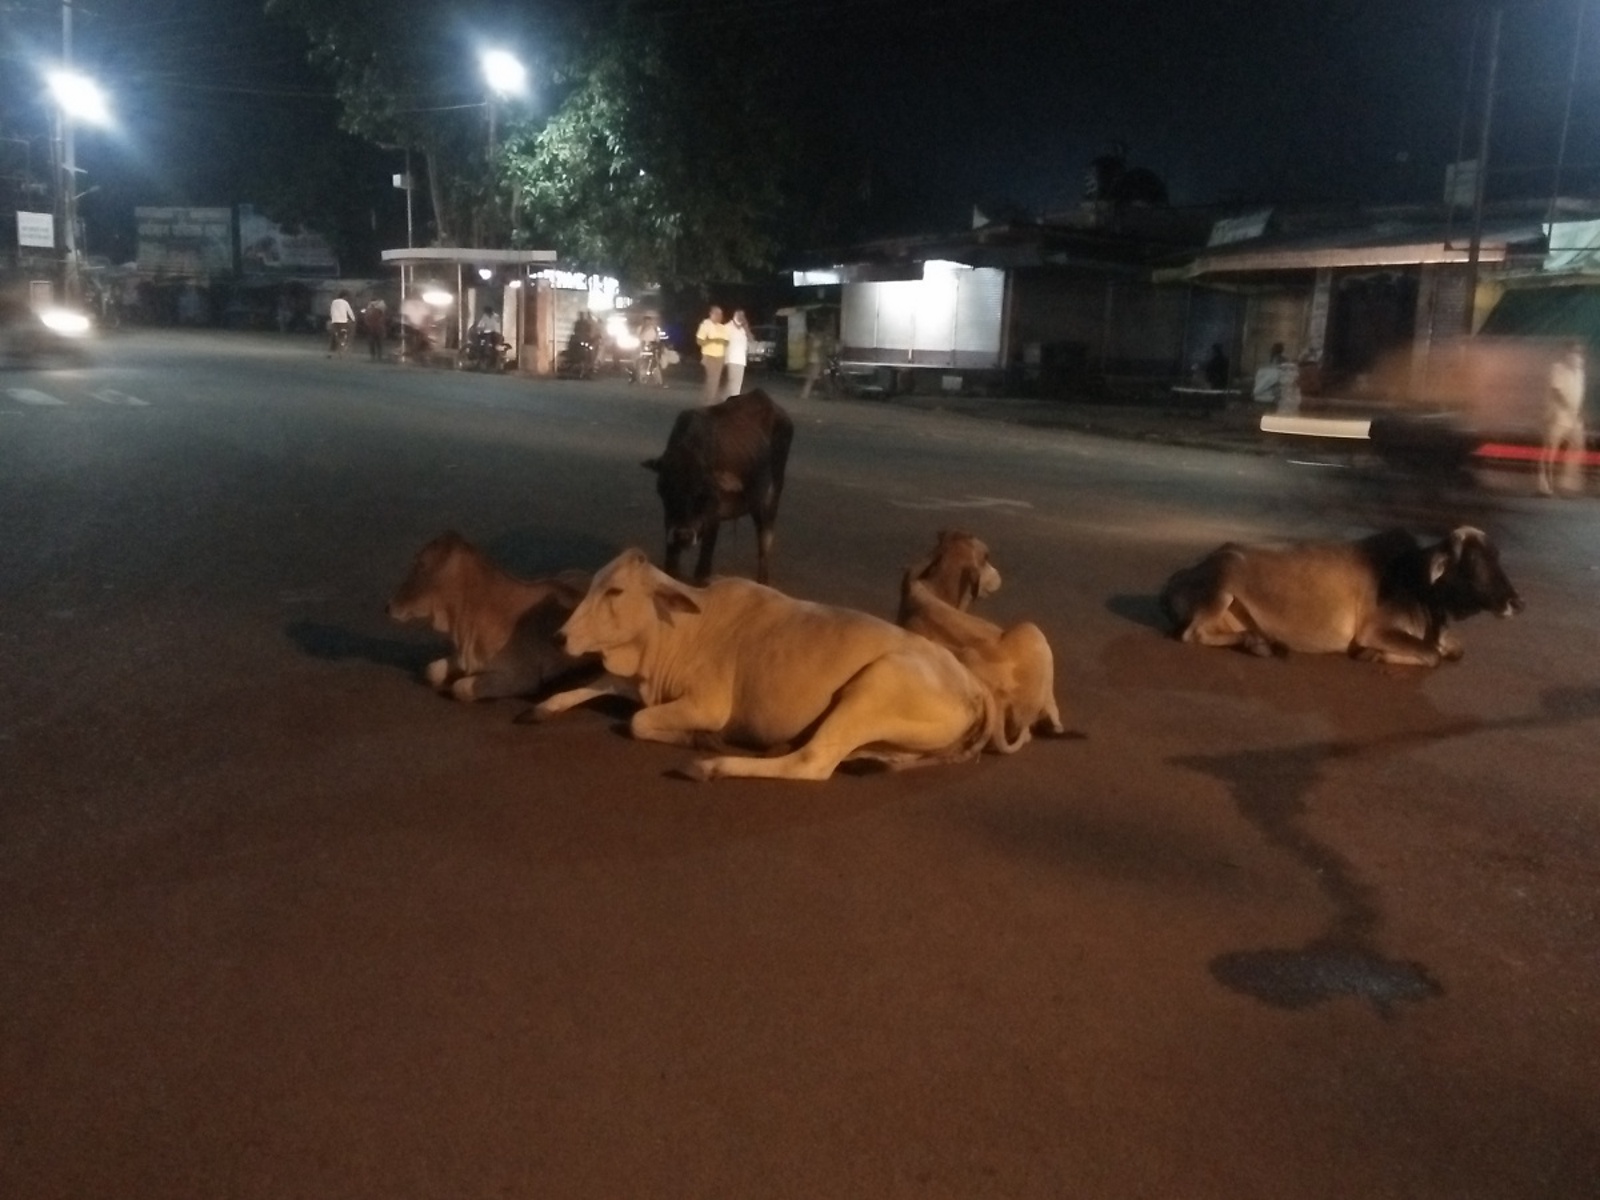 Traffic affected by cattle sitting on the road